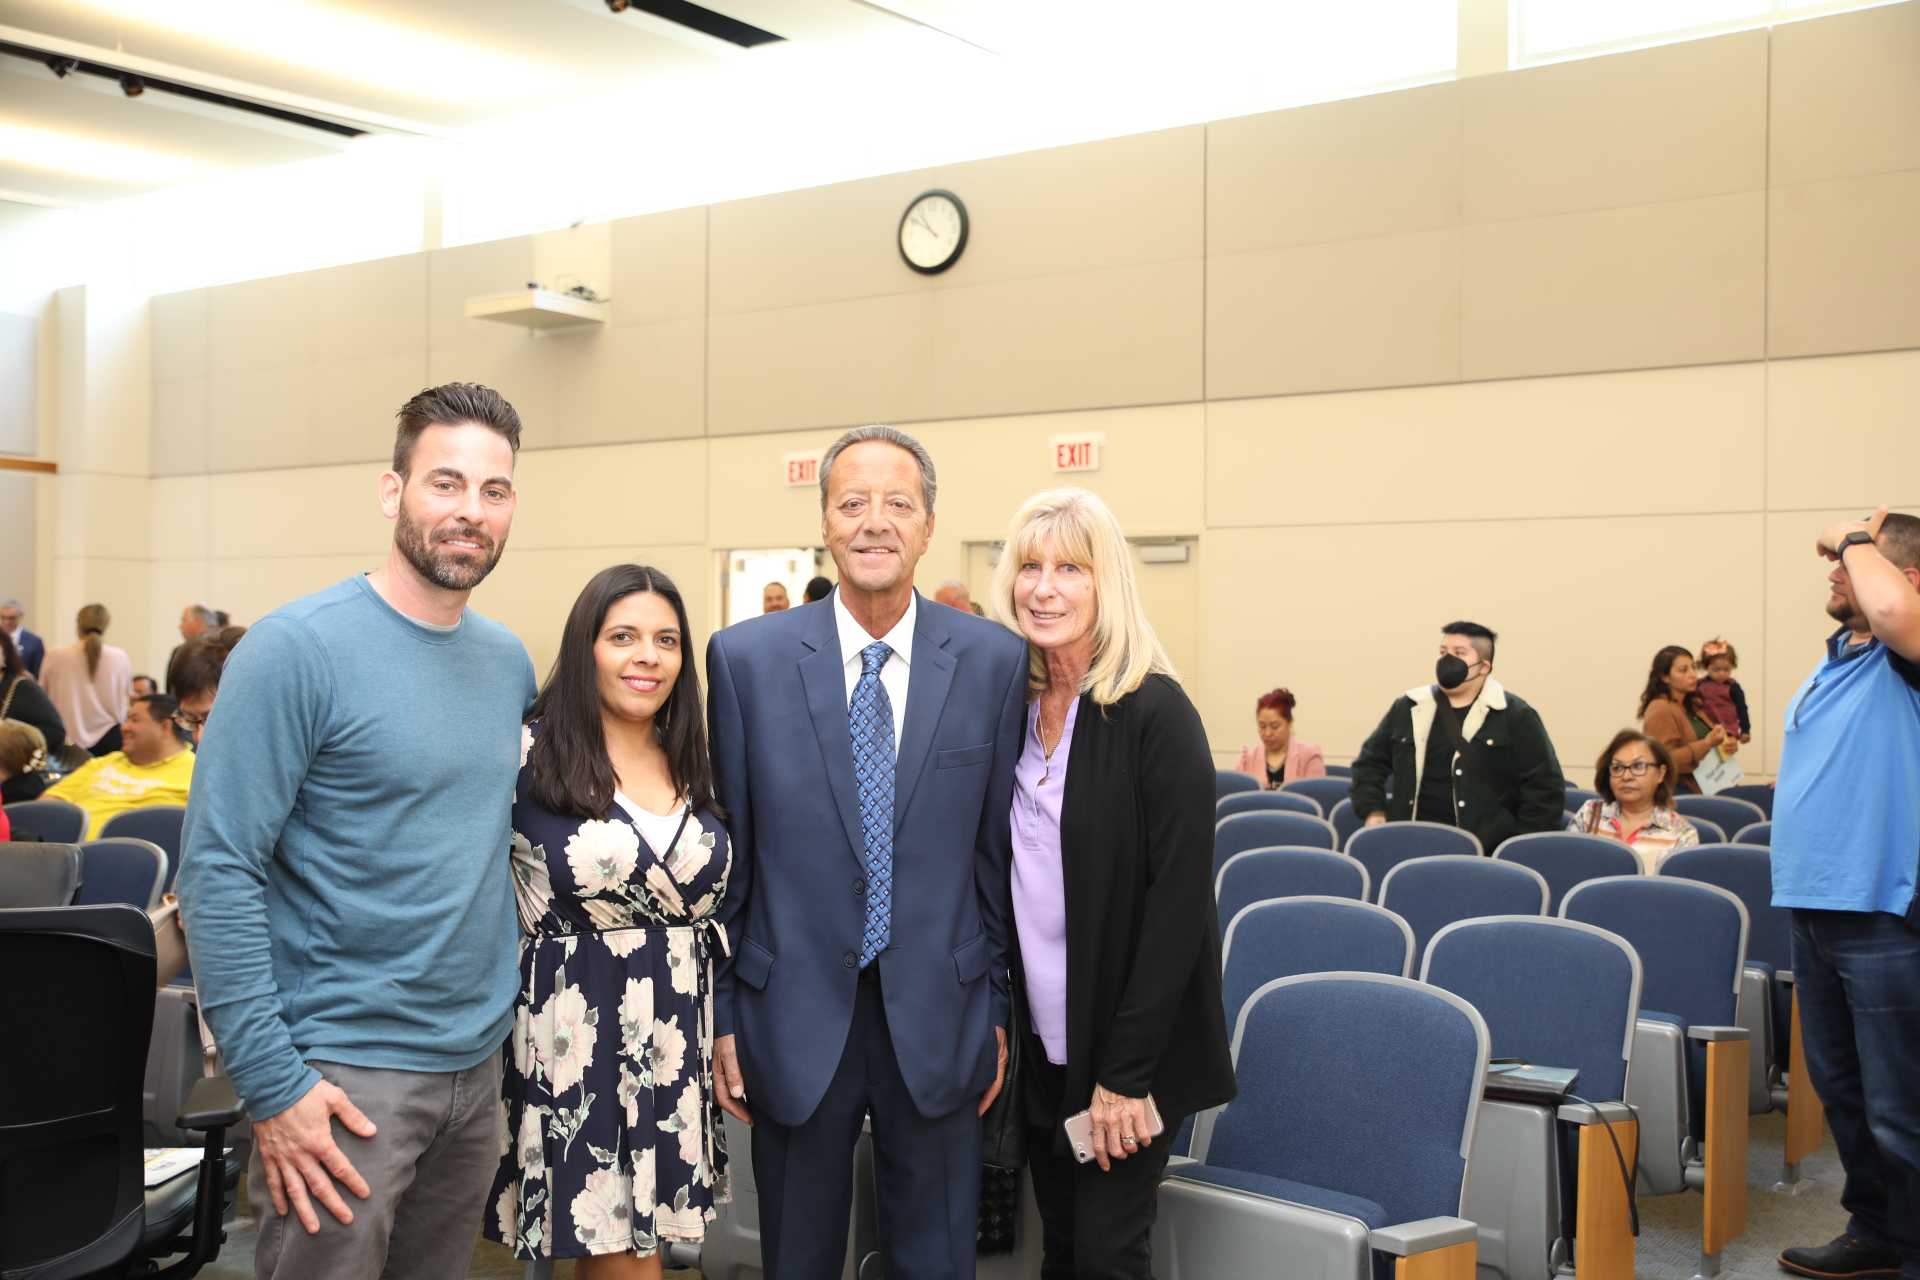 Trustee John Cava with his family after being sworn in to office as Trustee at the May 9, 2023 board meeting